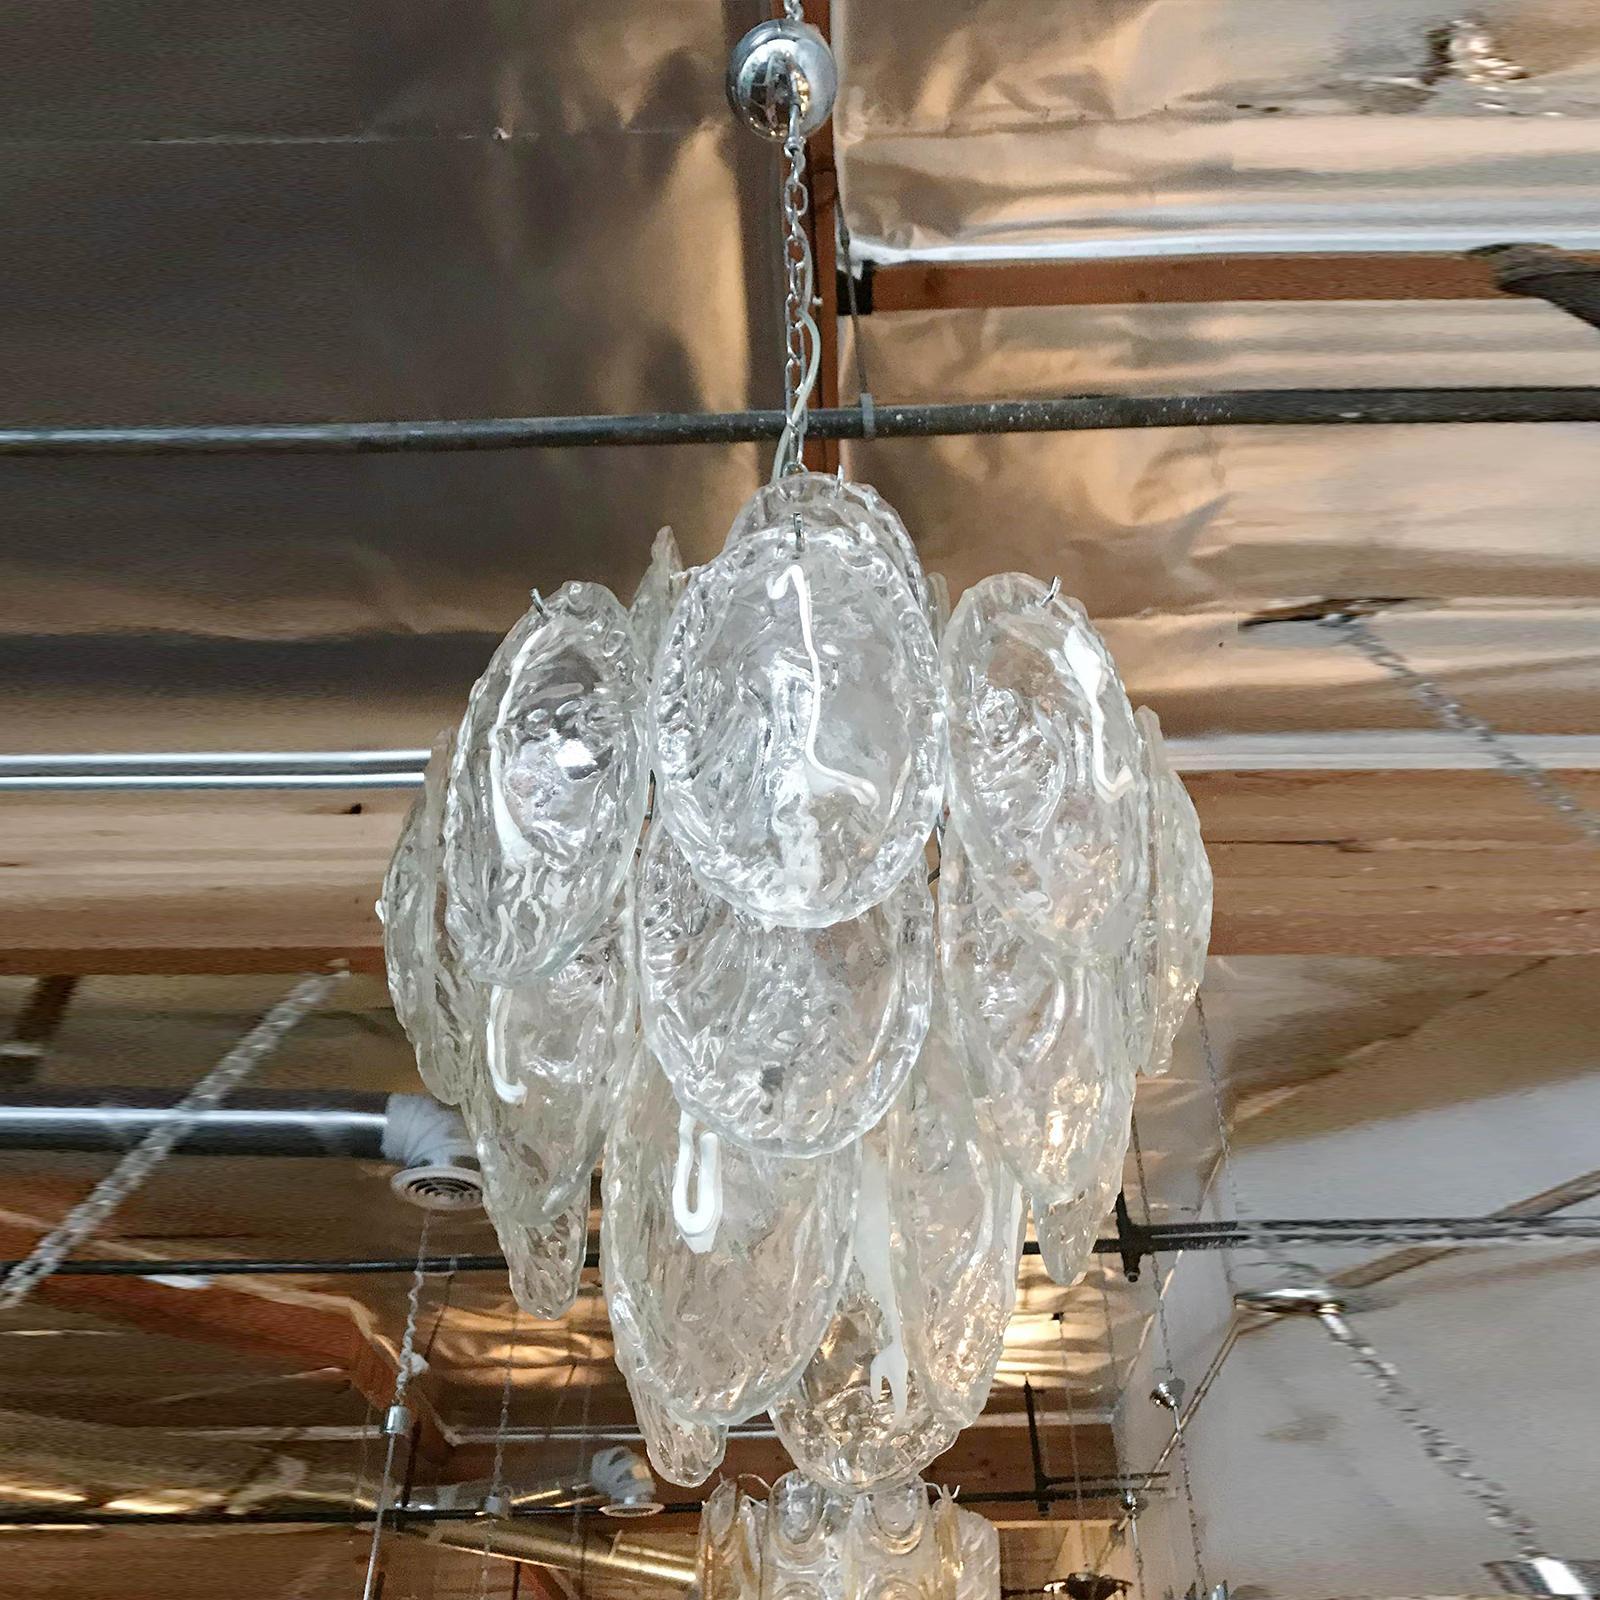 Vintage Italian Chandelier w / Murano Glass Shells Designed by Mazzega, c 1960s In Good Condition For Sale In Los Angeles, CA